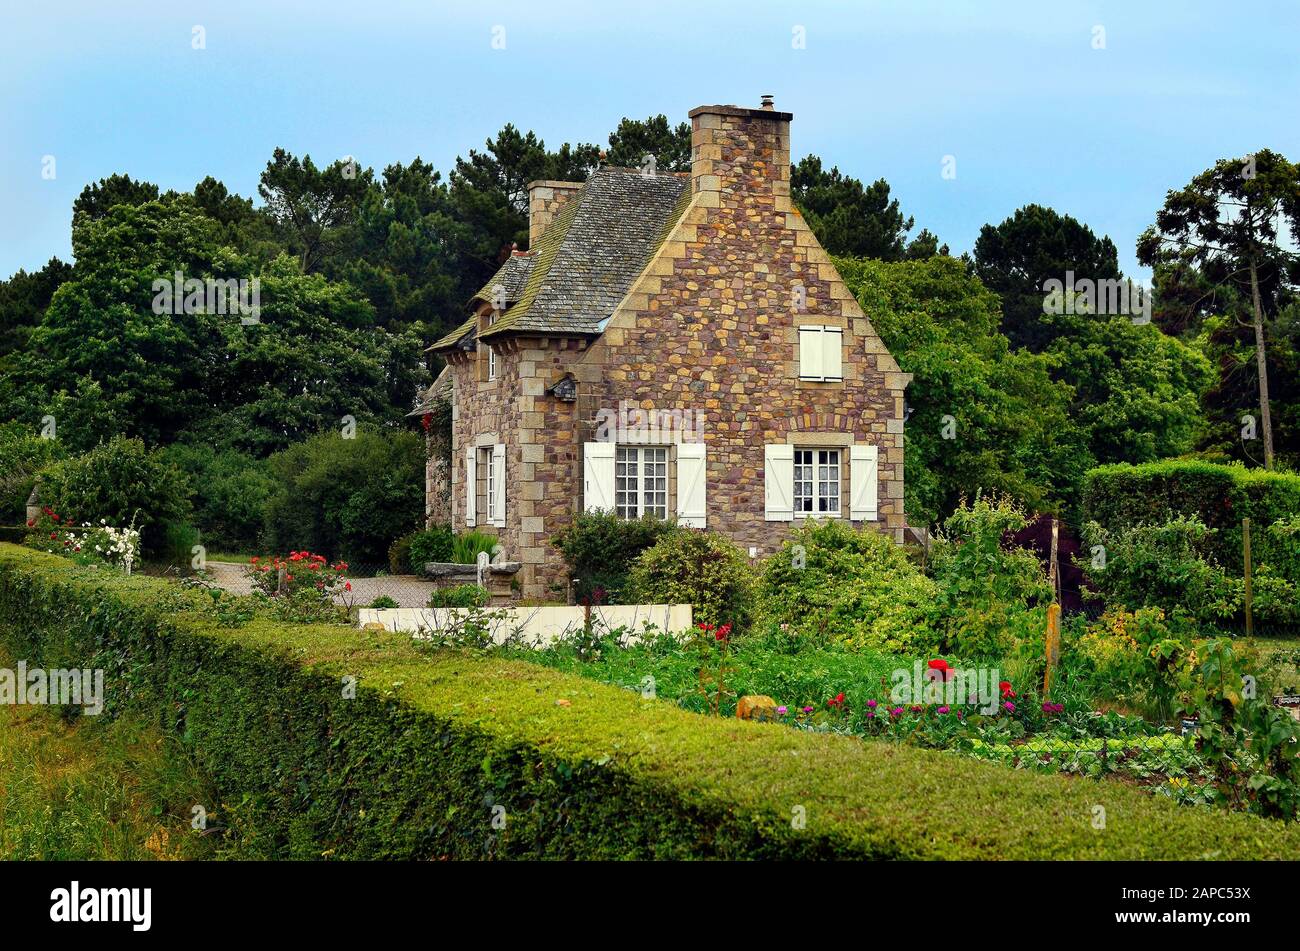 France, Brittany,traditional stone built home Stock Photo